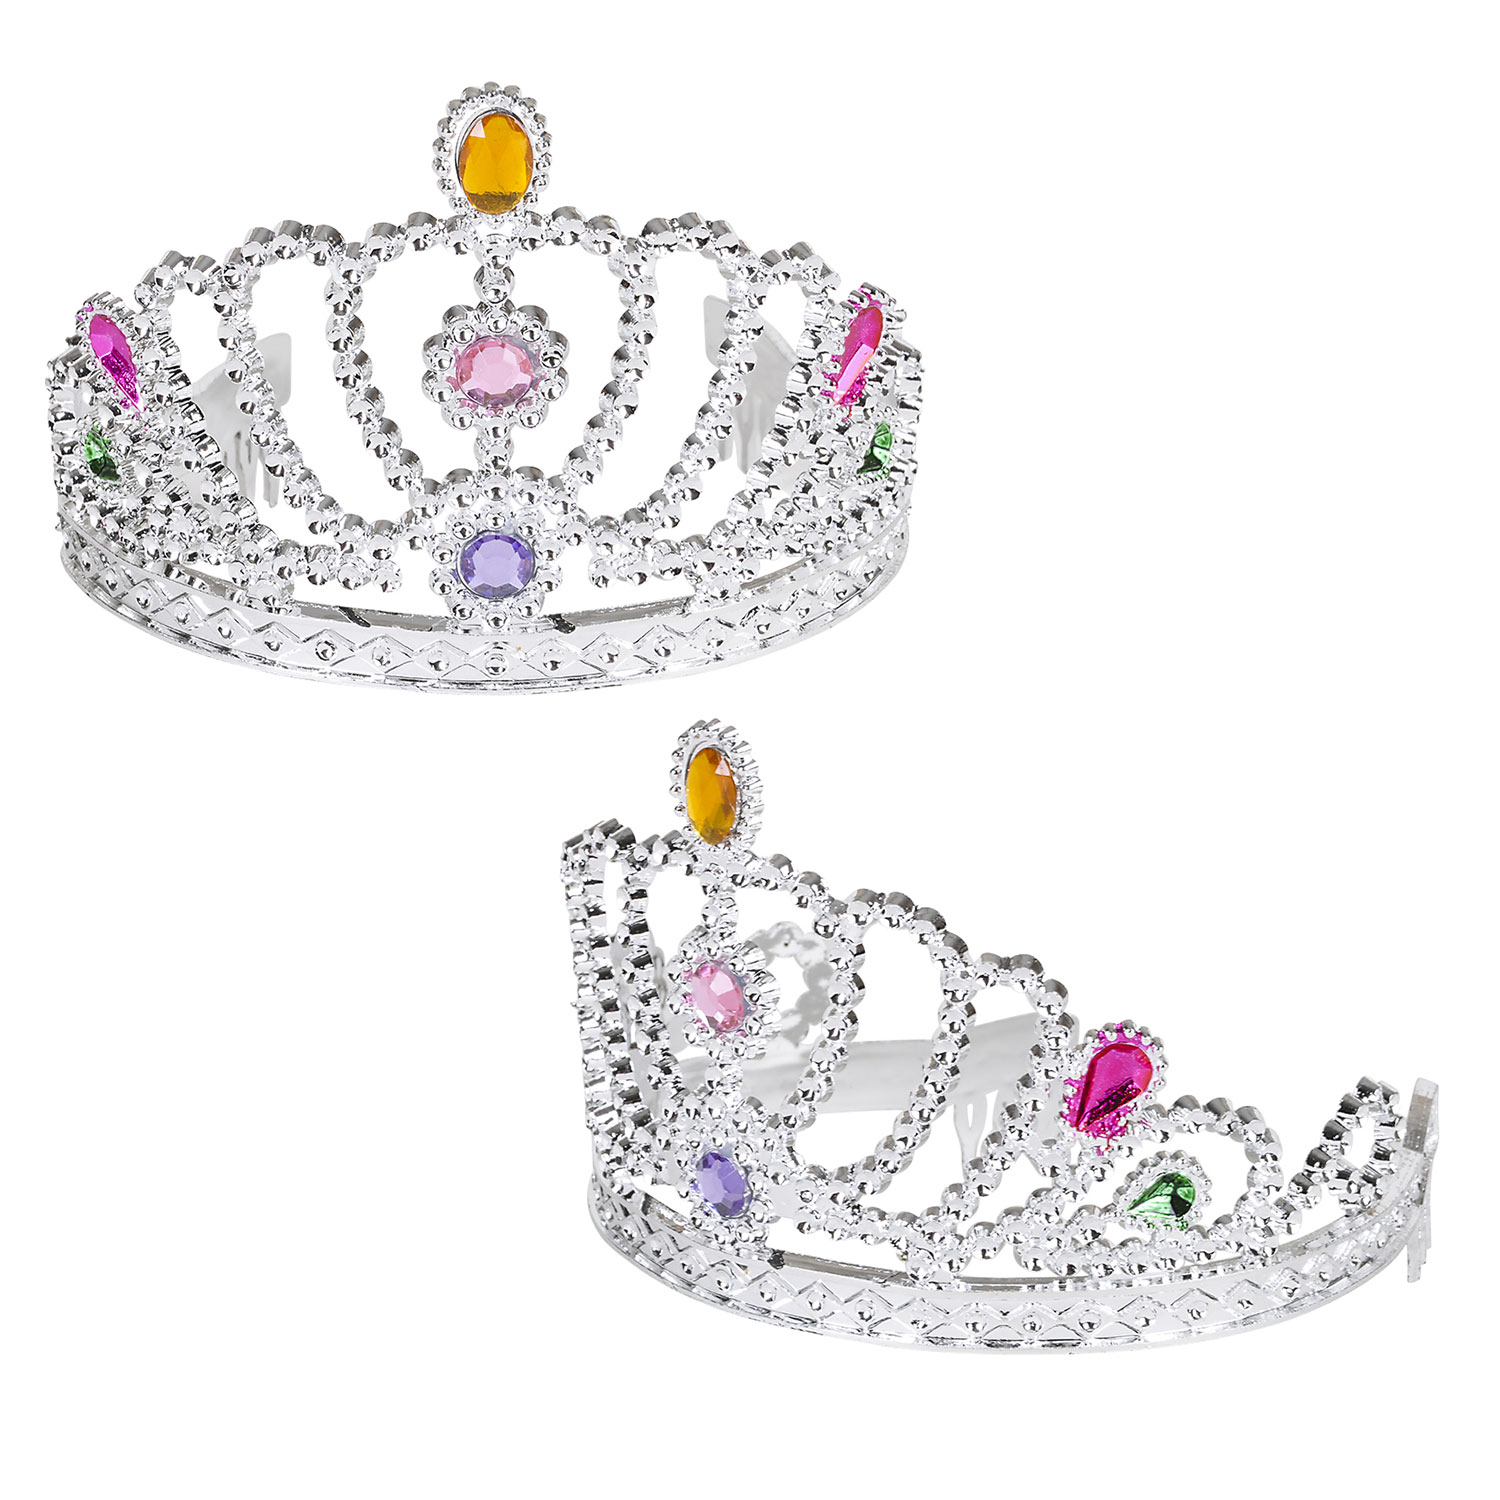 Pink-Silver Jeweled Tiara Party Favor - Pack of 12 Plastic Crowns